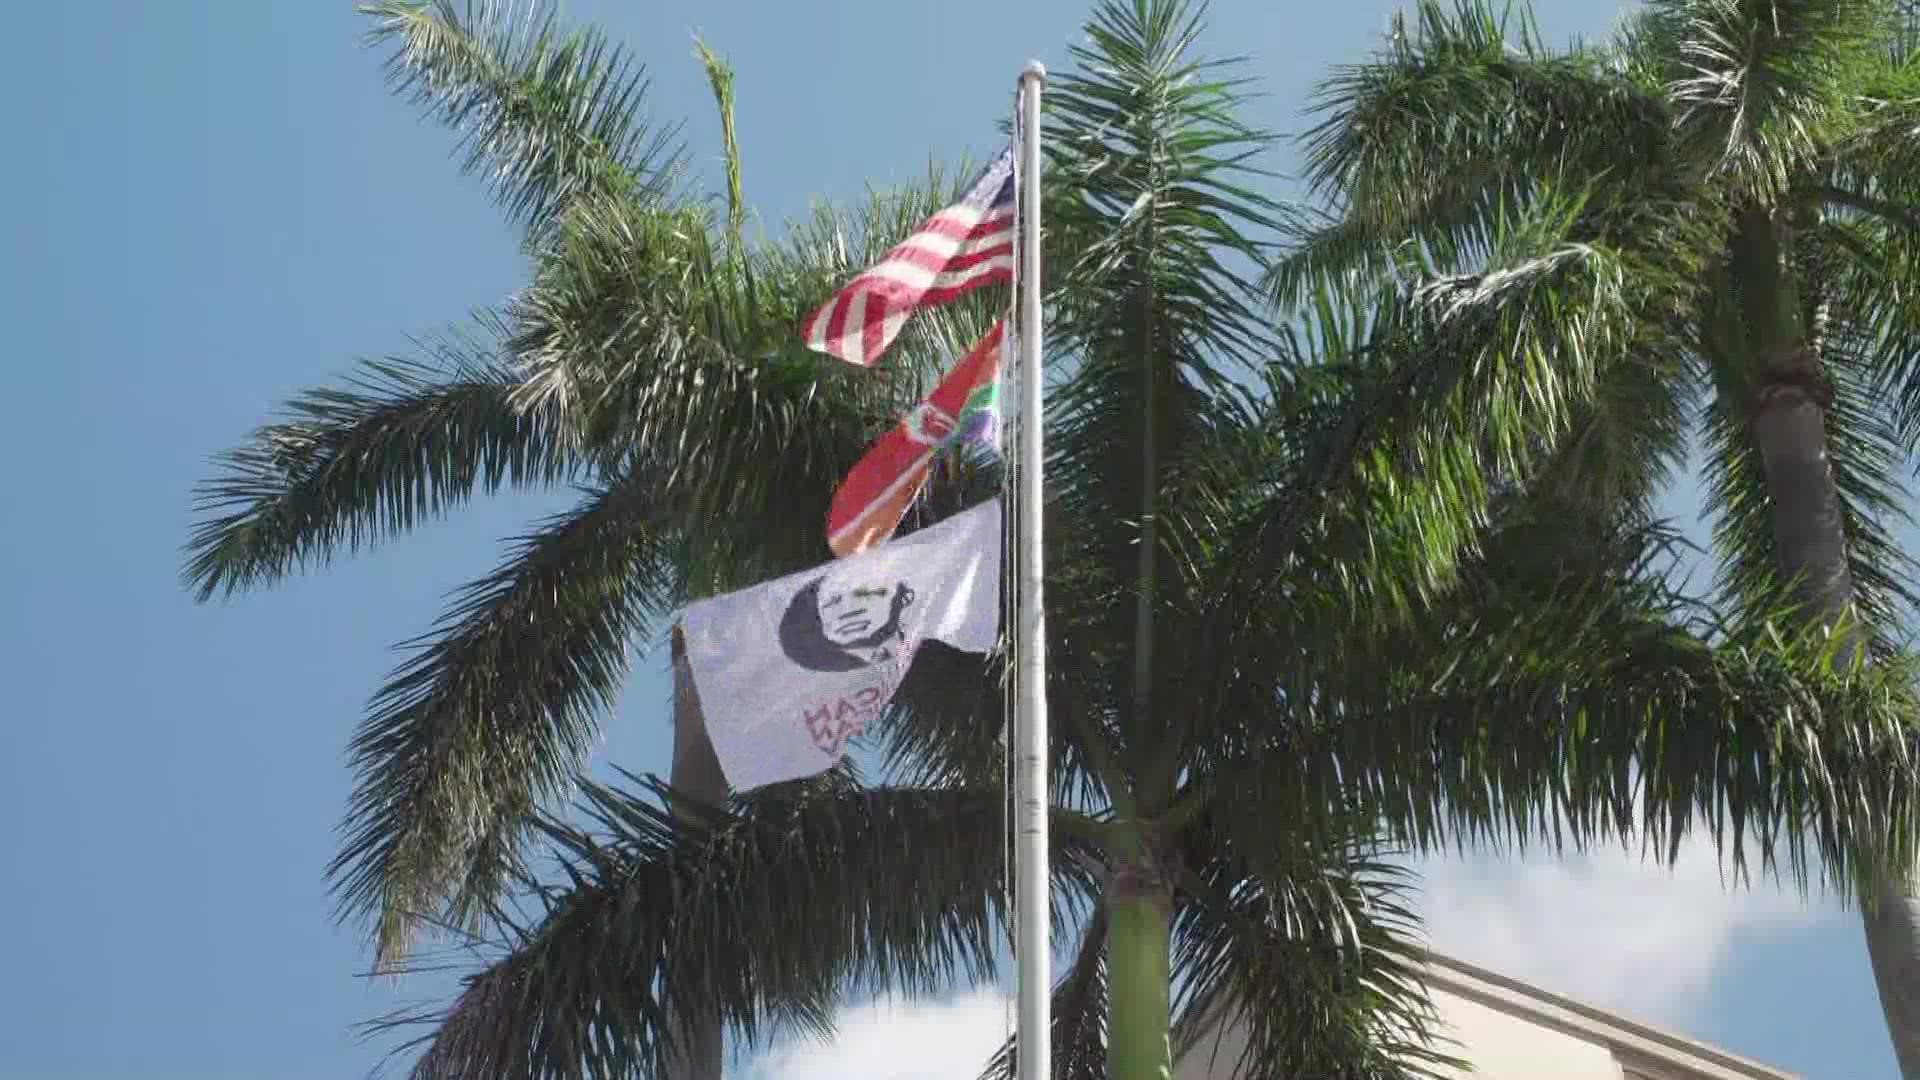 February is Black History Month, and the city of St. Pete honored the occasion with a special flag-raising ceremony outside city hall.